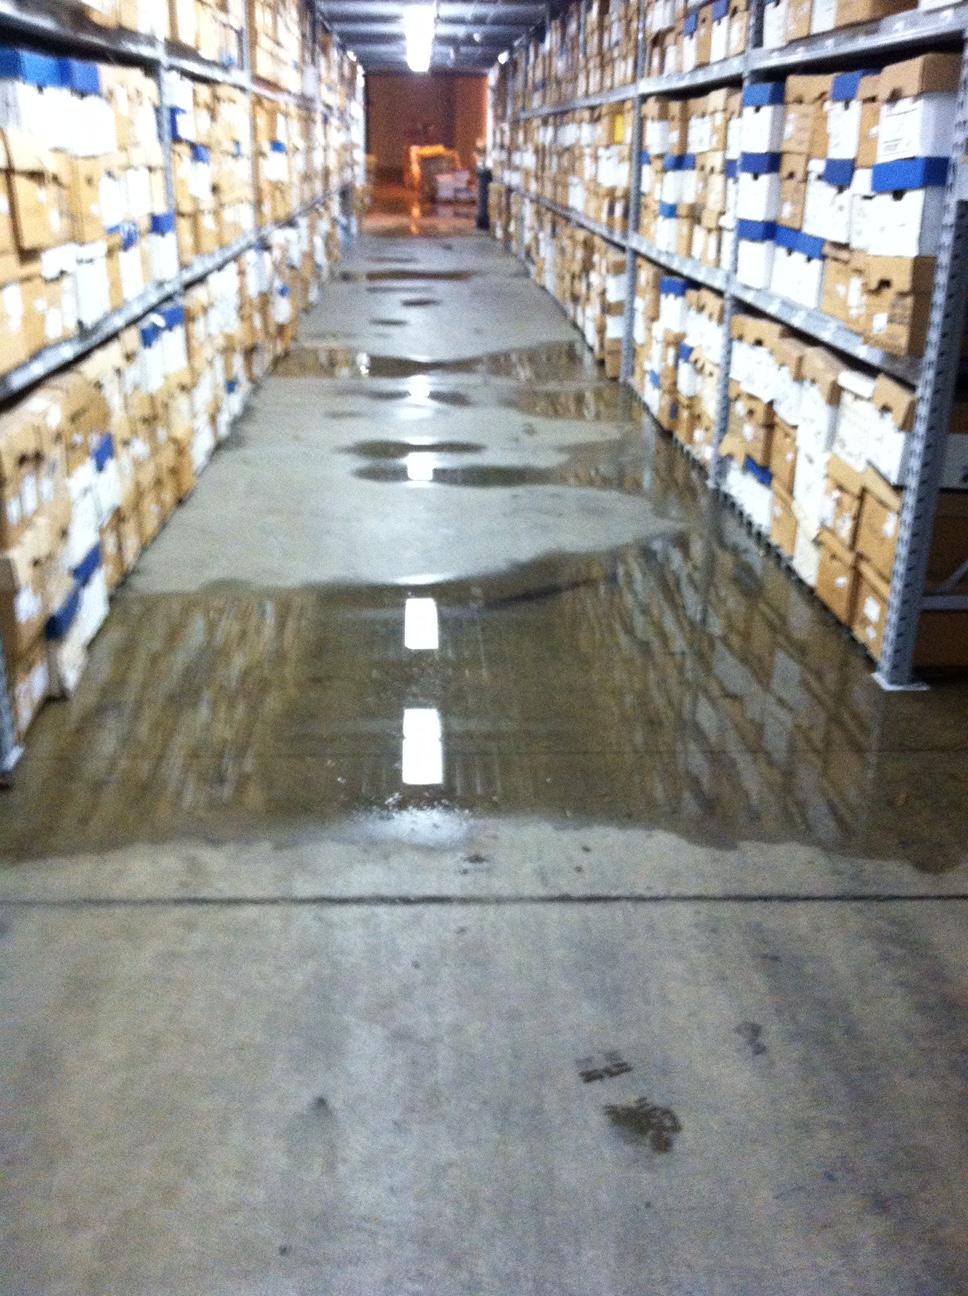 Arriving at a large commercial water loss.